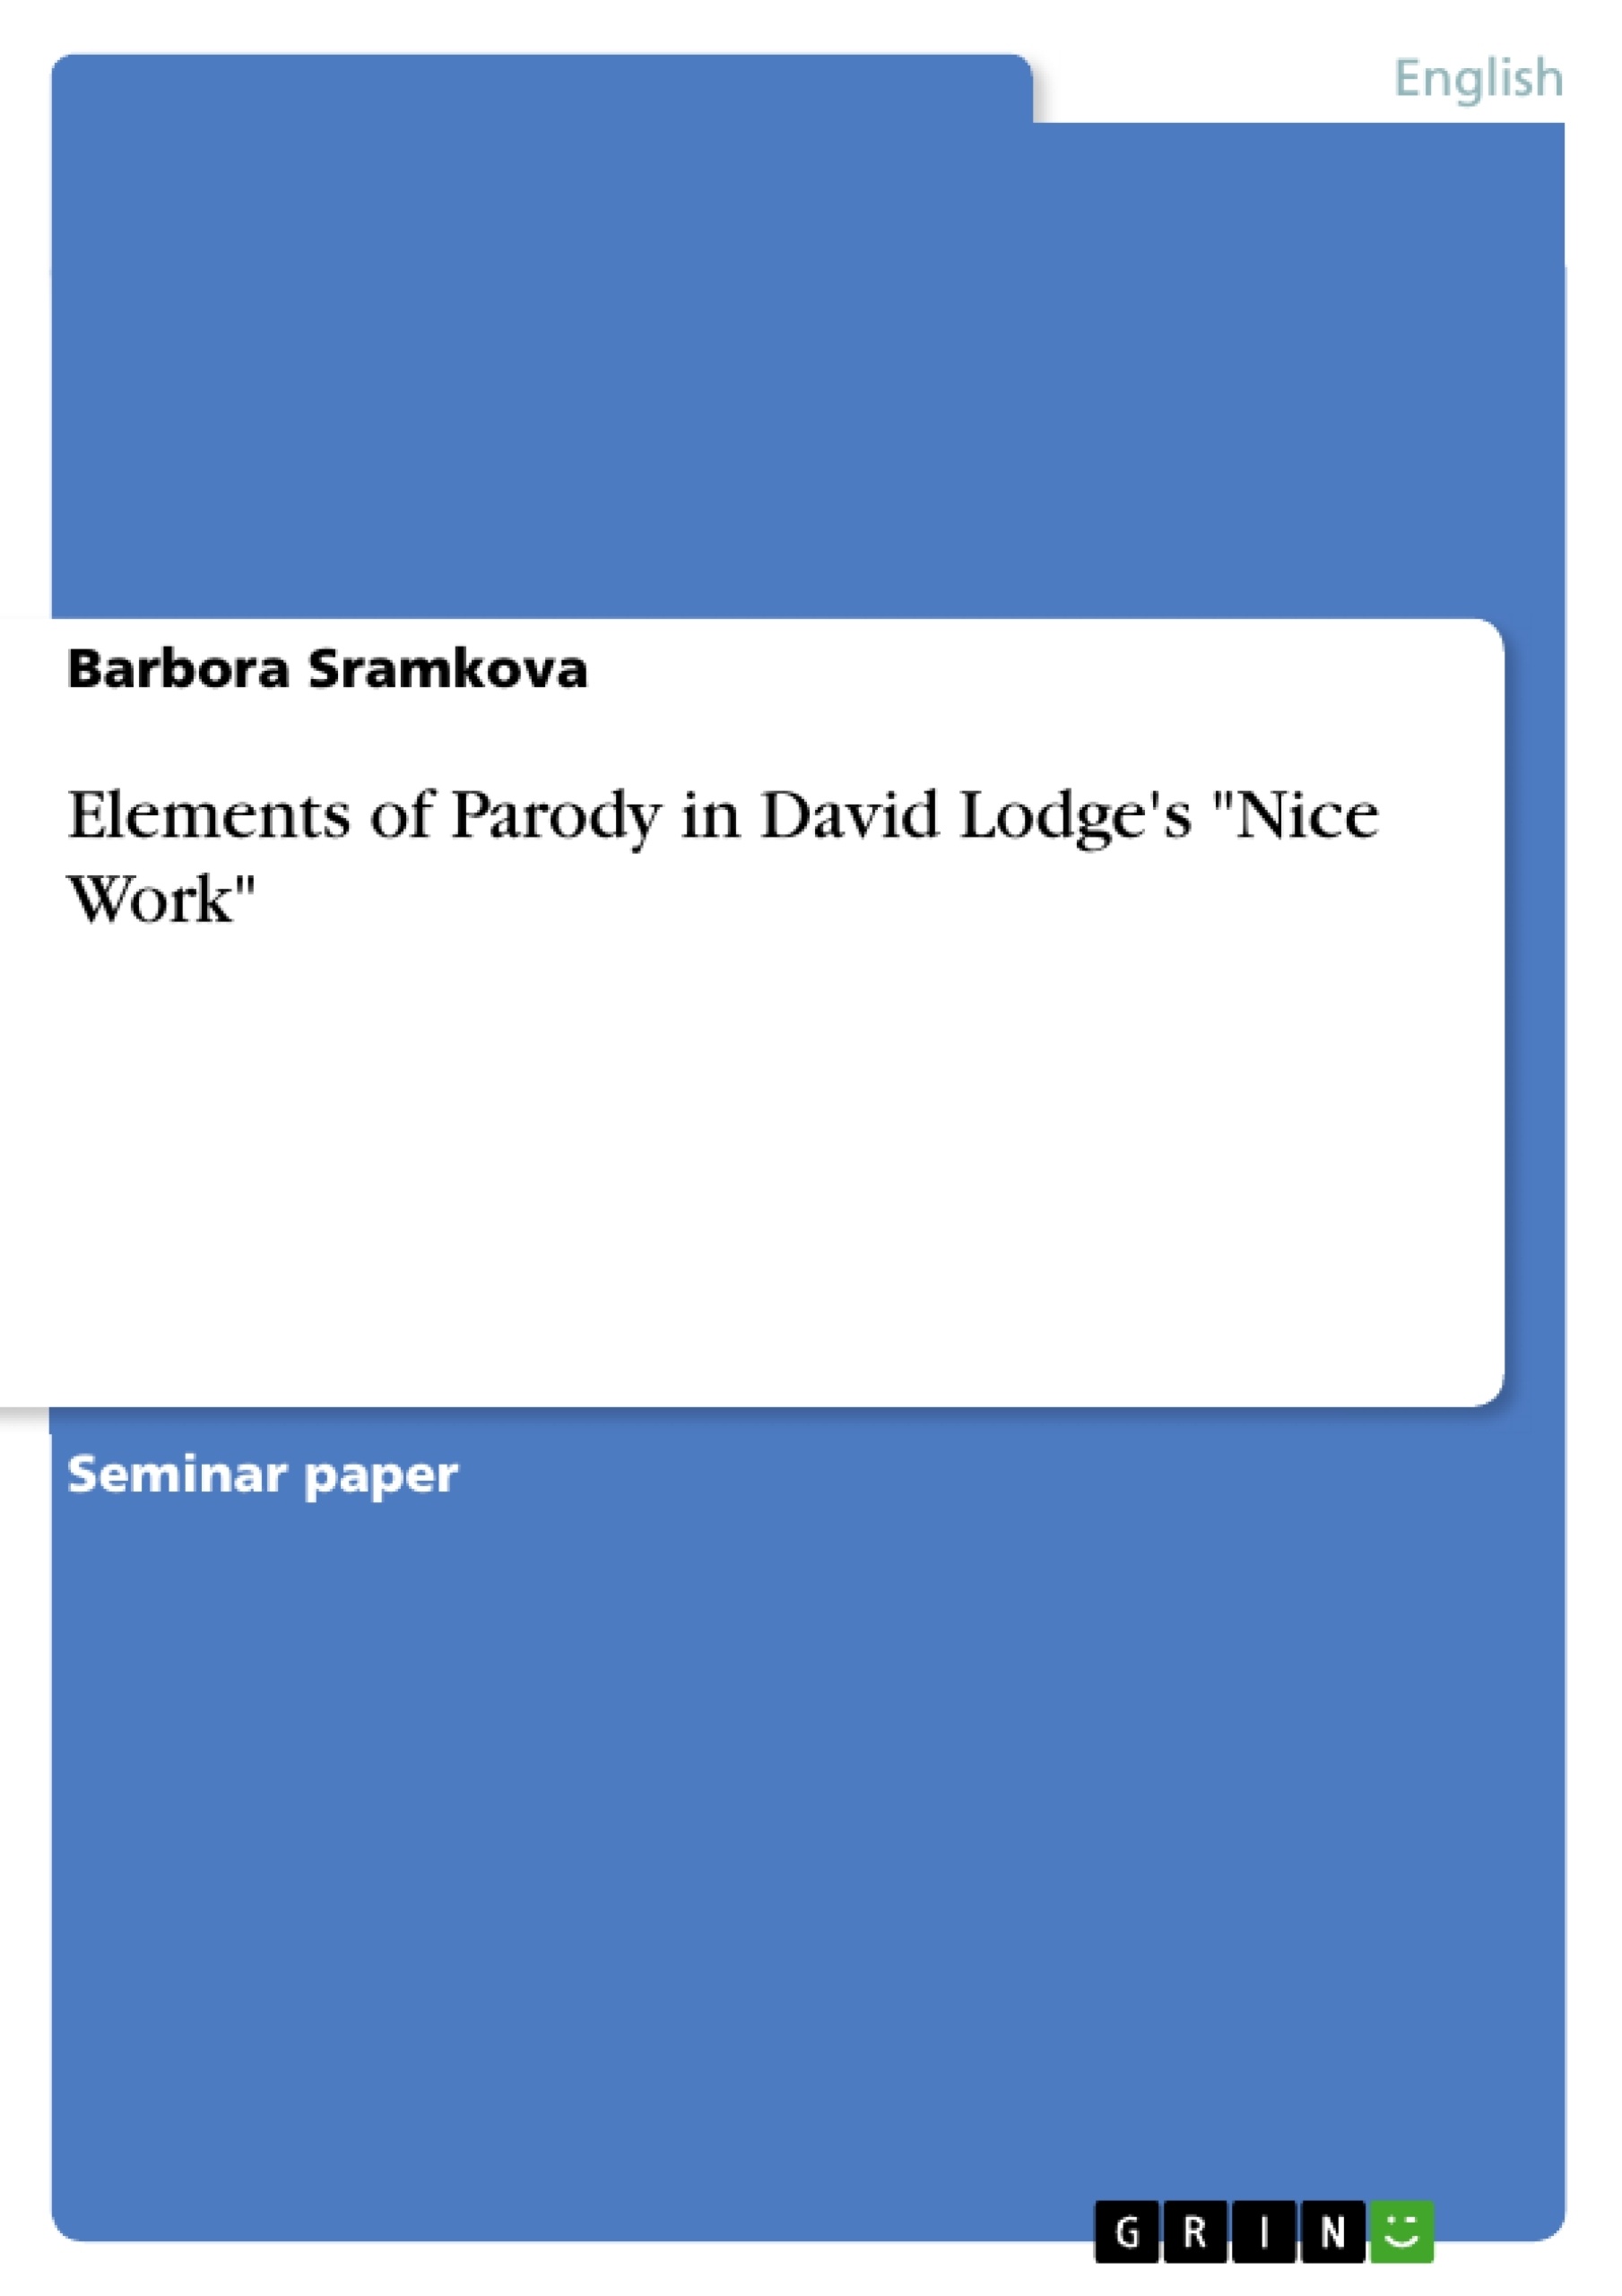 Title: Elements of Parody in David Lodge's "Nice Work"